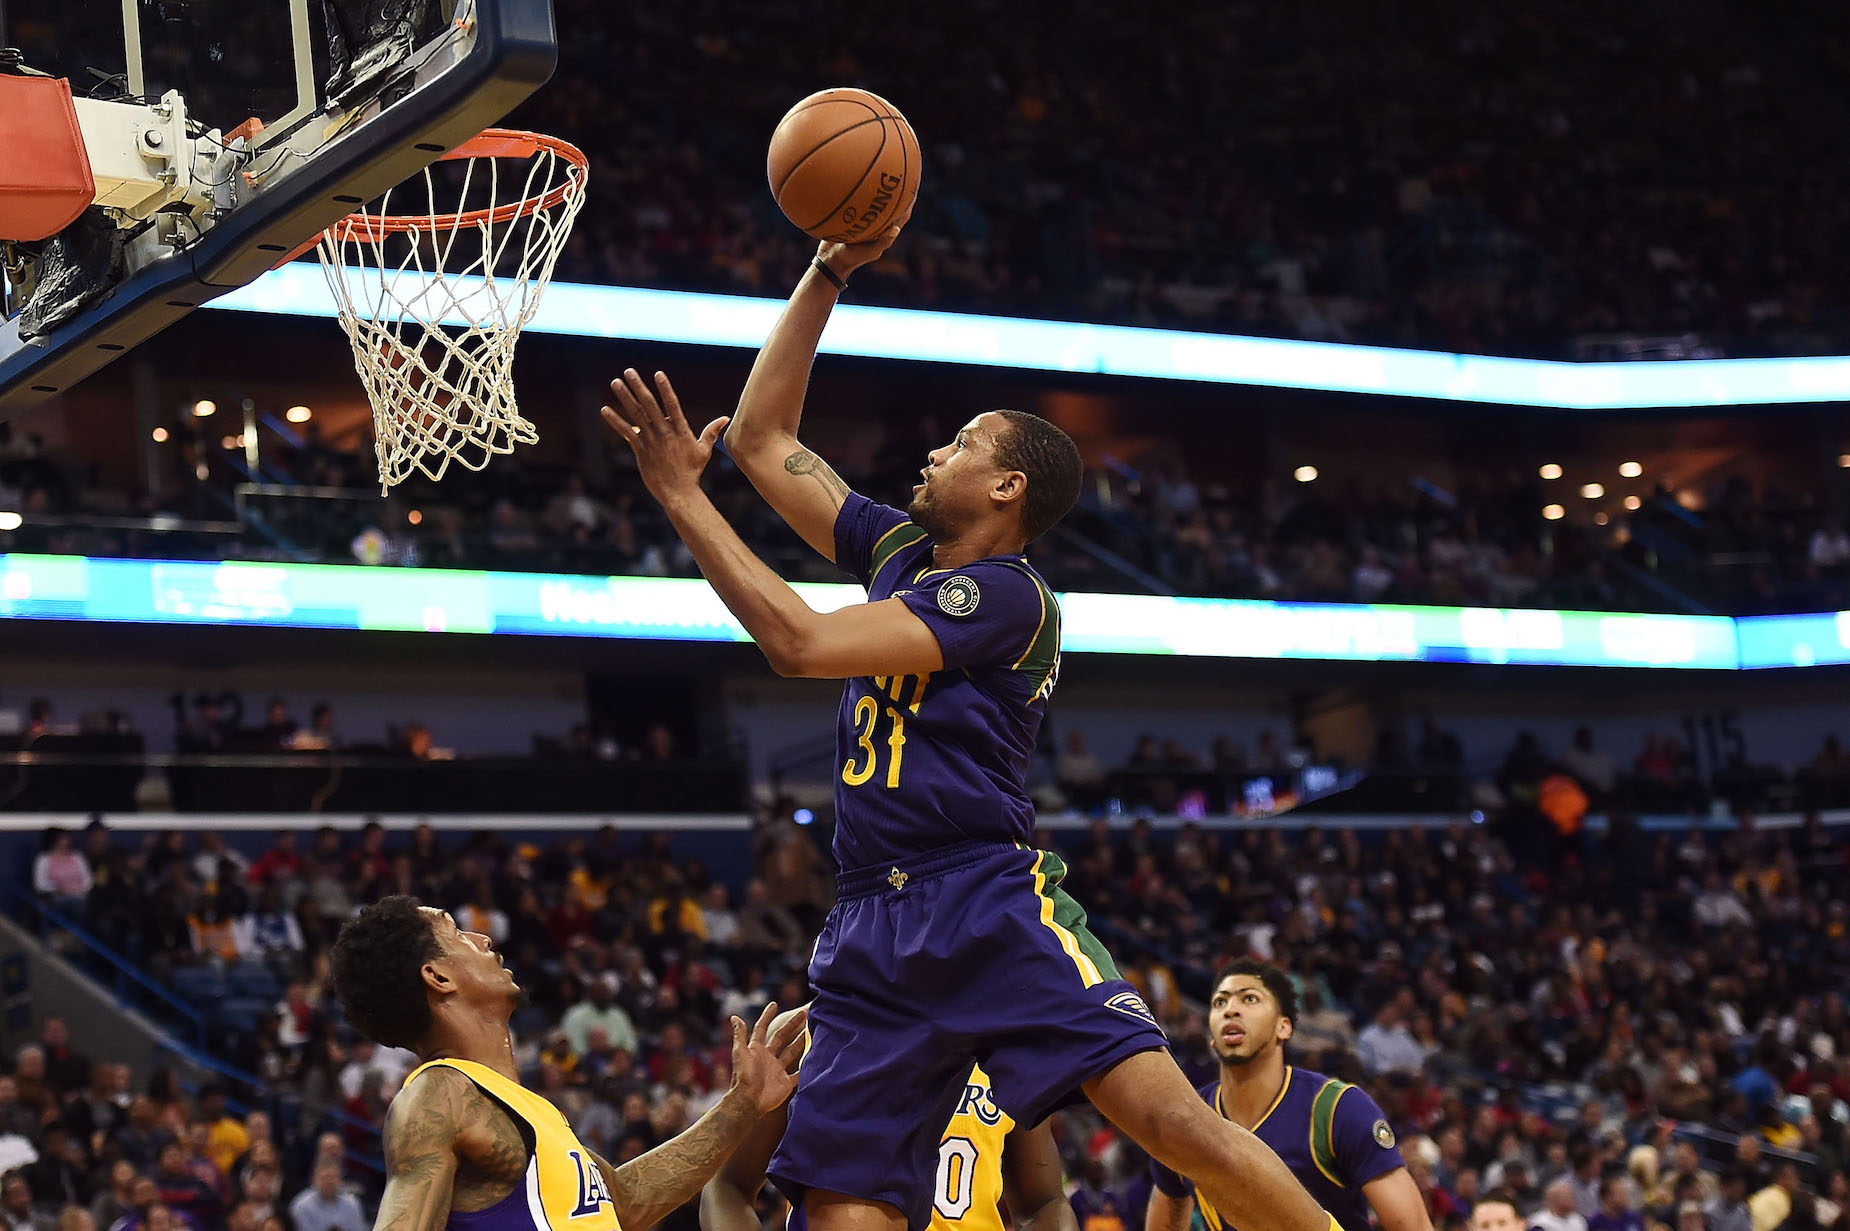 New Orleans Pelicans guard Bryce Dejean-Jones tragically died after his first season in the NBA.